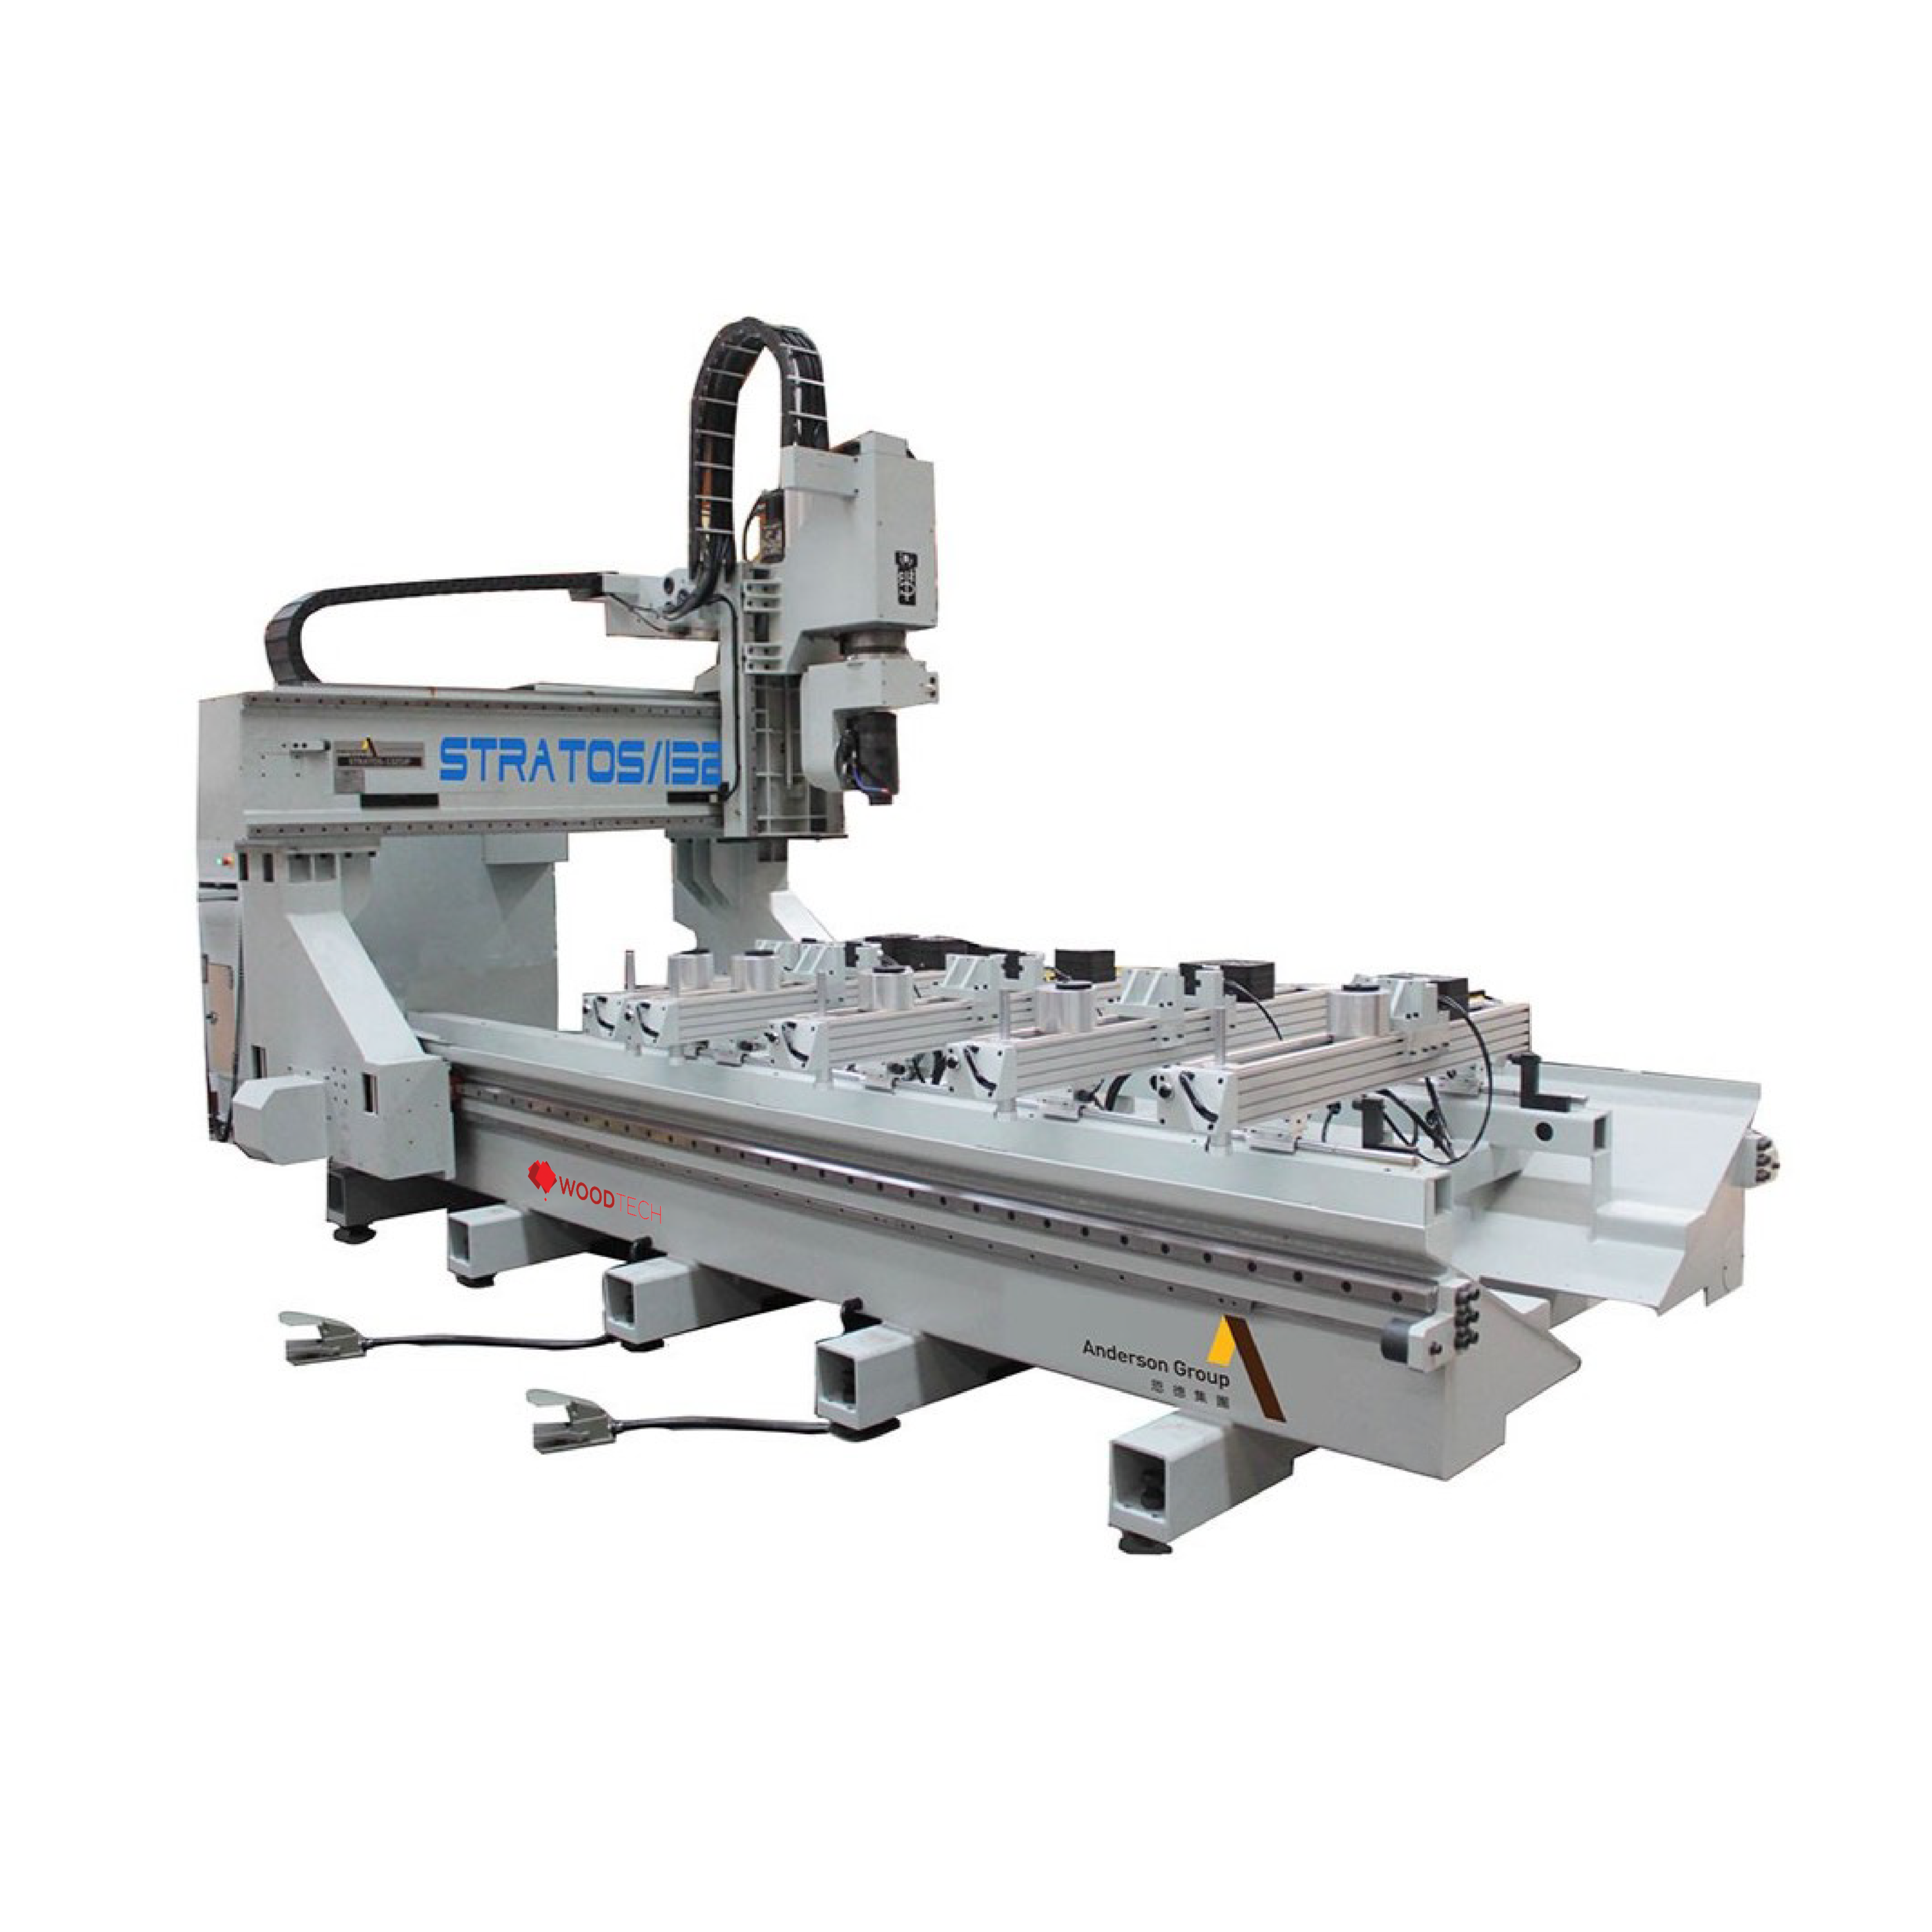 STRATOS IP Series 5 Axis CNC Router